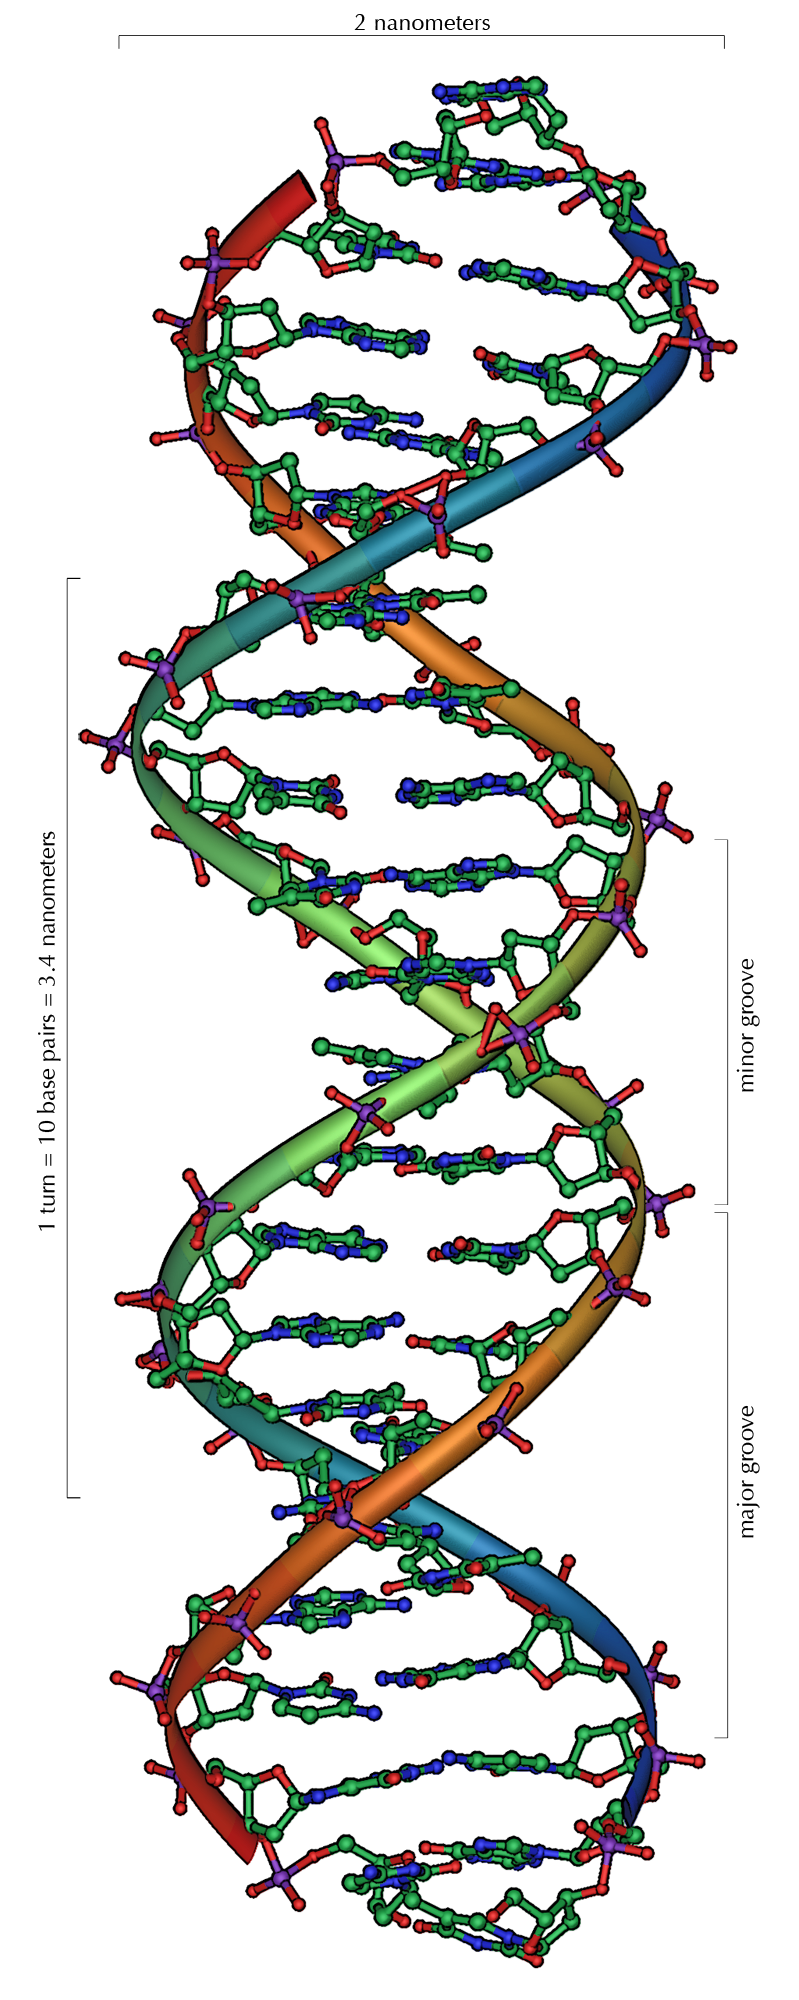 Image shows a diagram of DNA. It is in the form of an alpha helix, each double strand is 2 nanometers wide, and a full turn of the helix is 10 base pairs and measures approximately 3.4 nanometers.